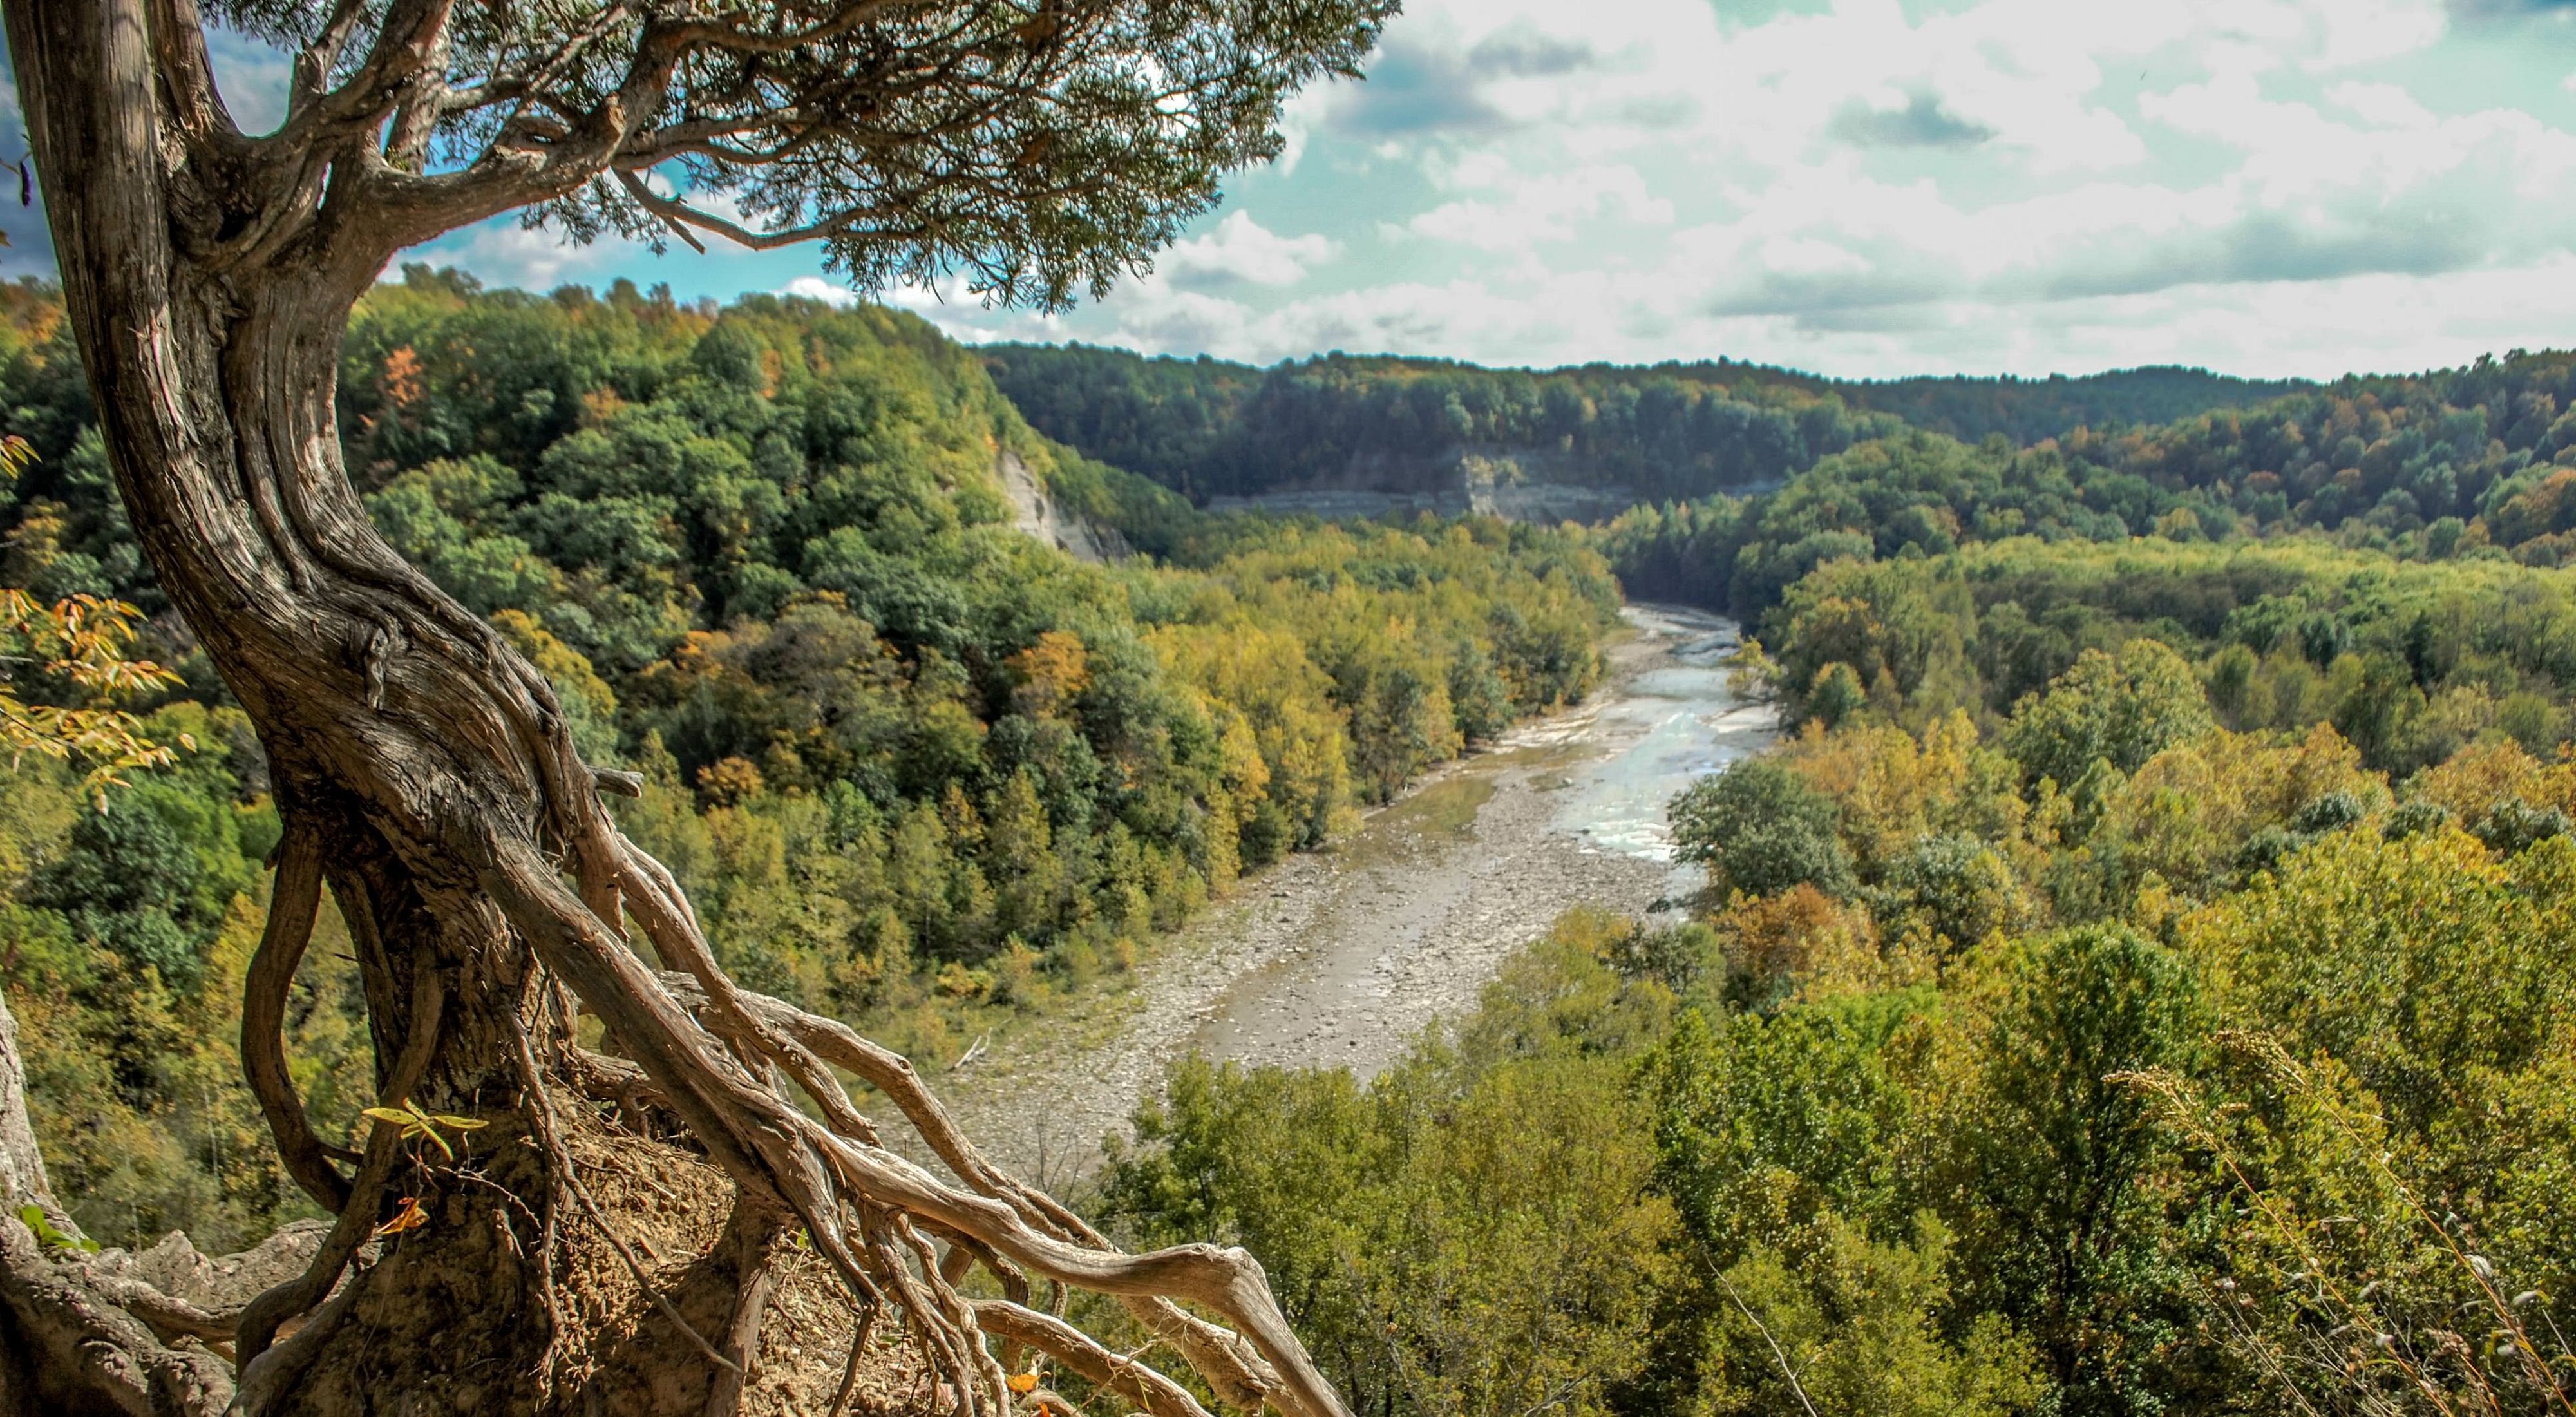 View through a tree overlooking a river and forest  in Zoar Valley